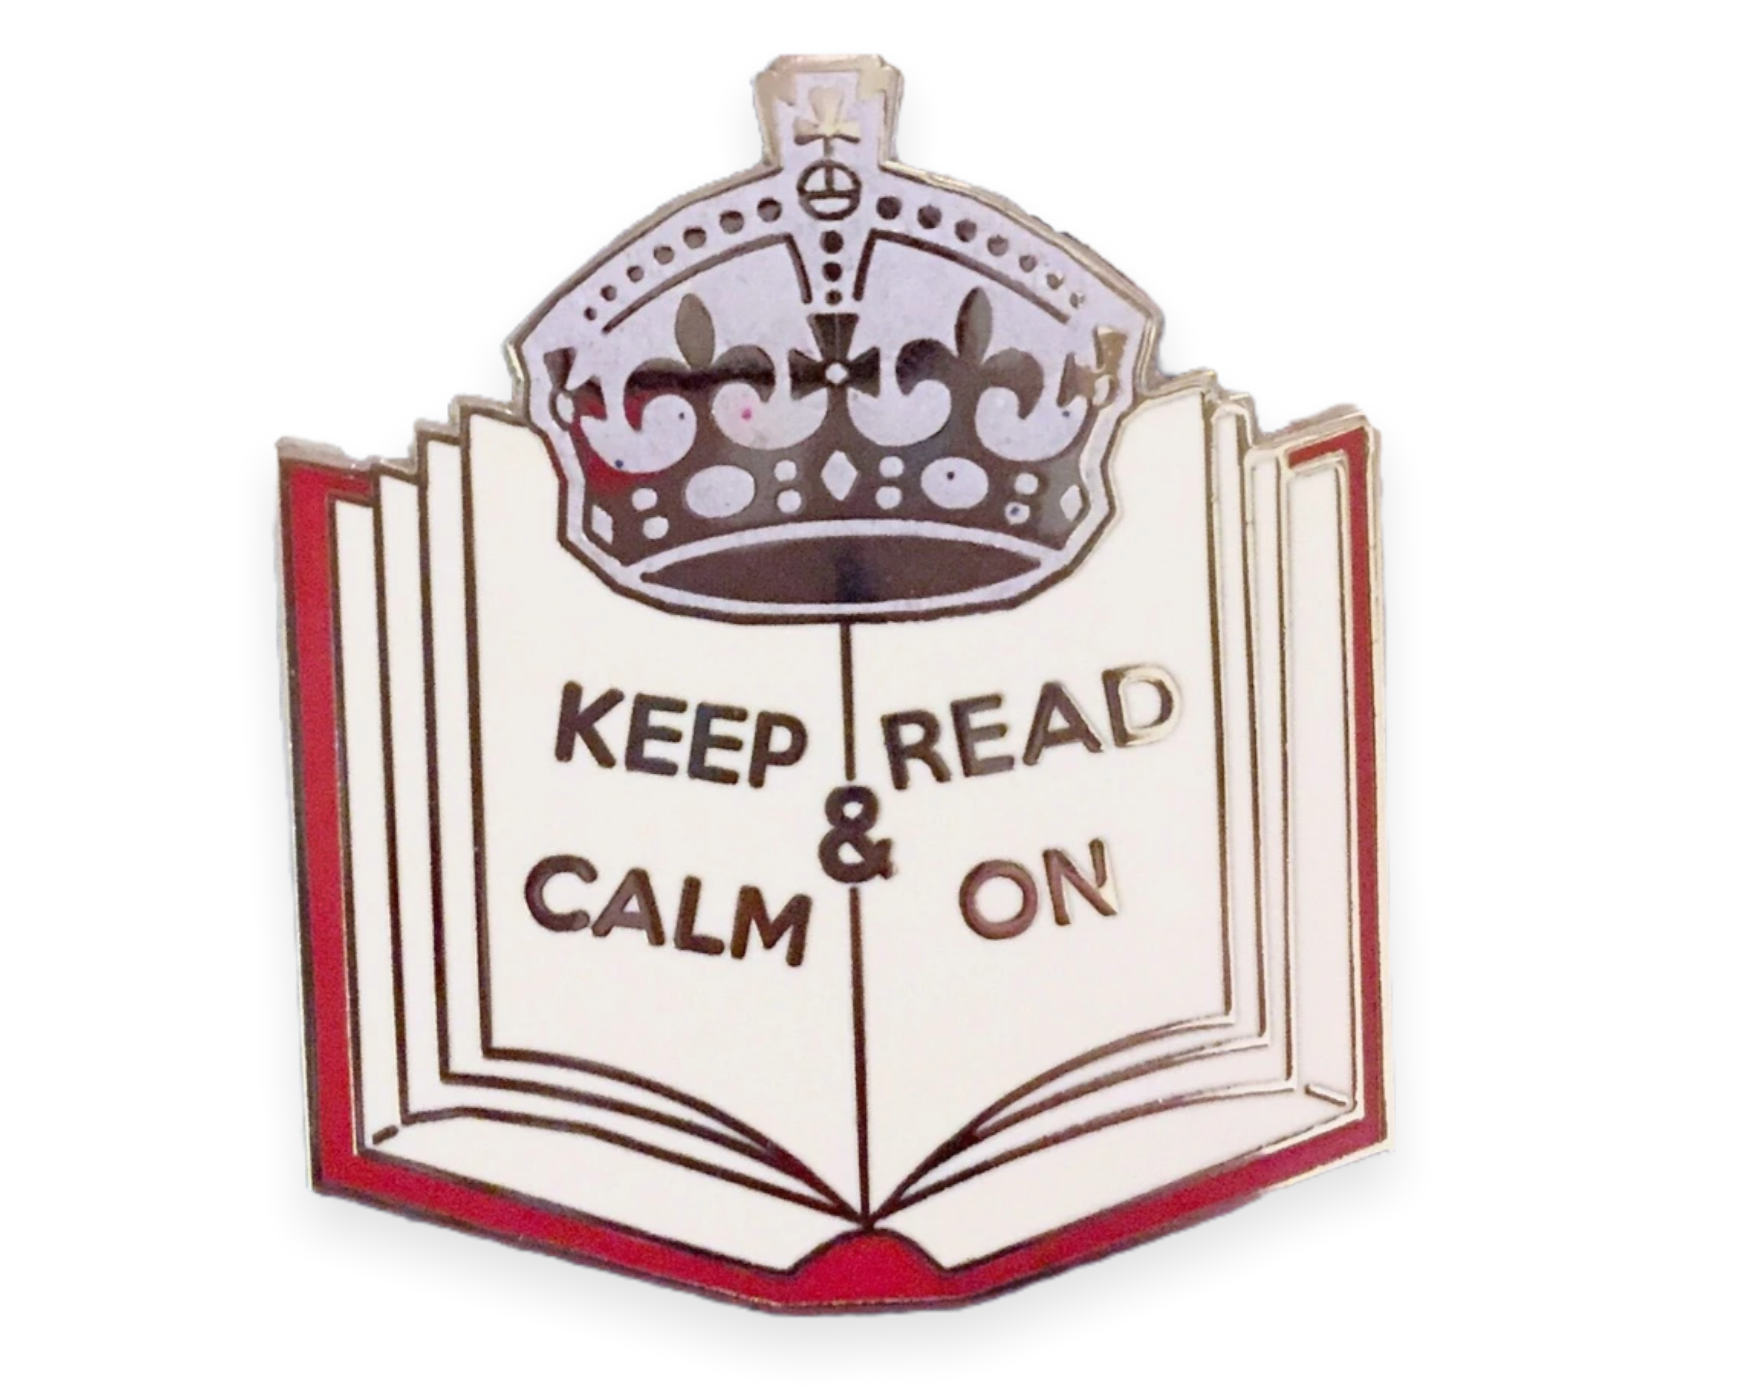 keep calm and read bookmark